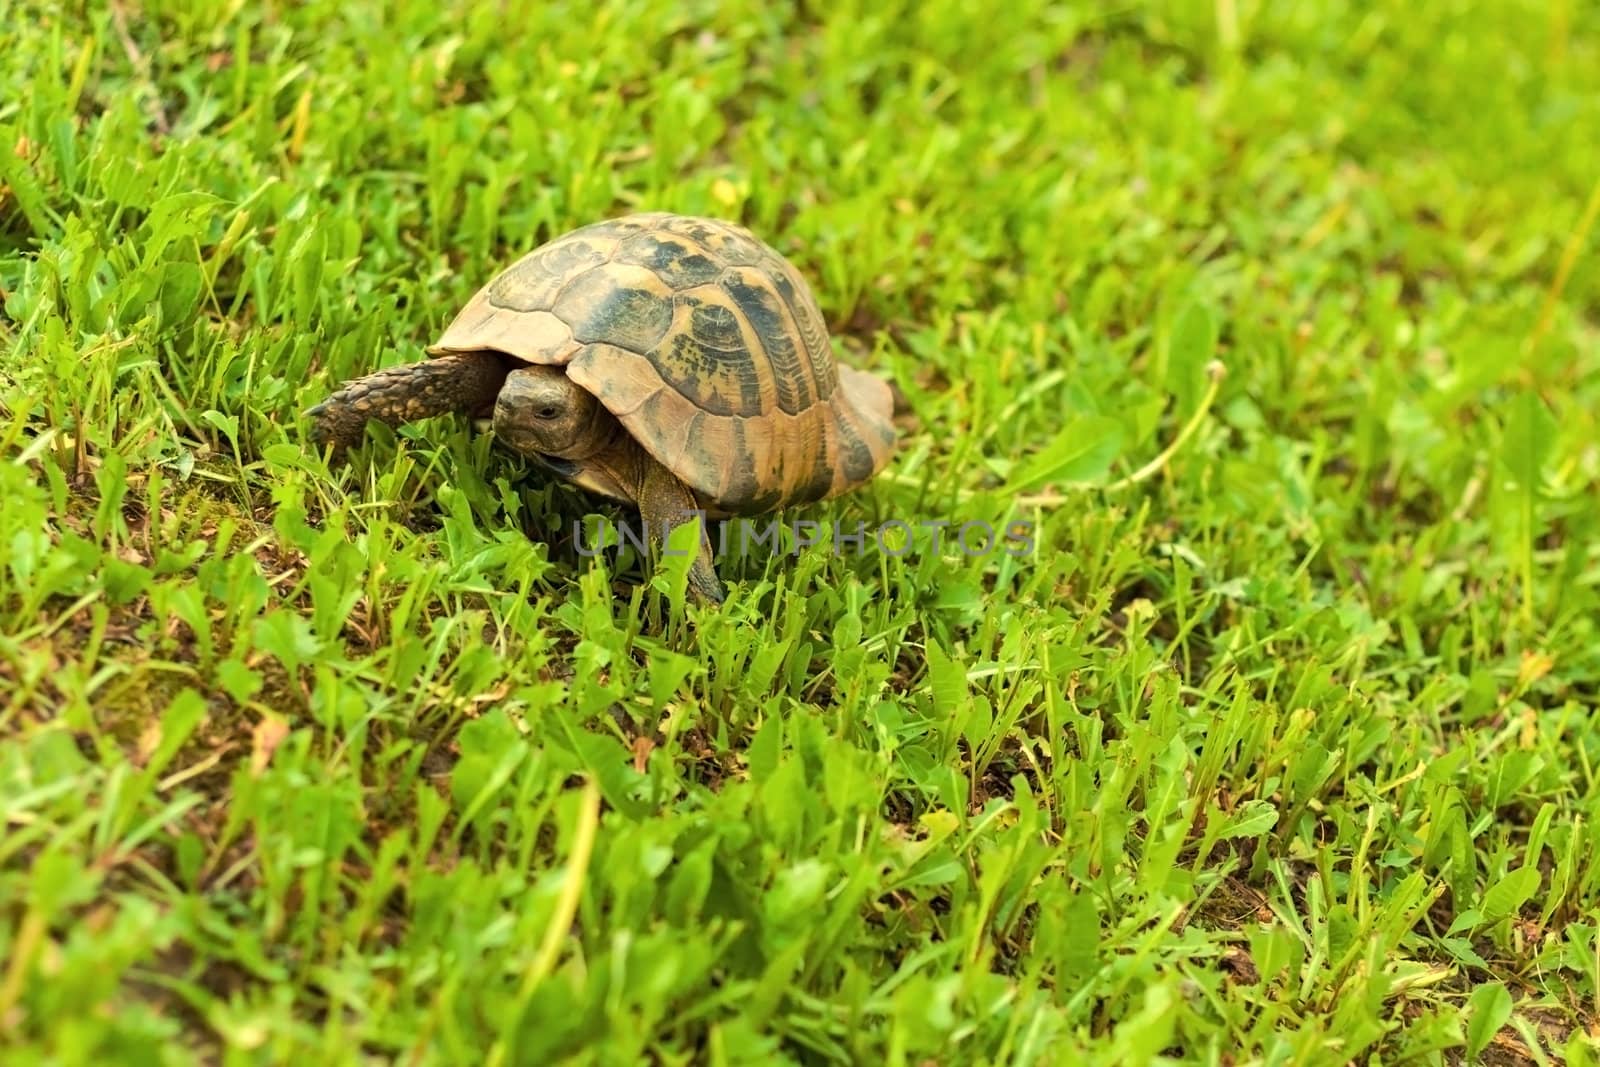 Turtle walking in the grass